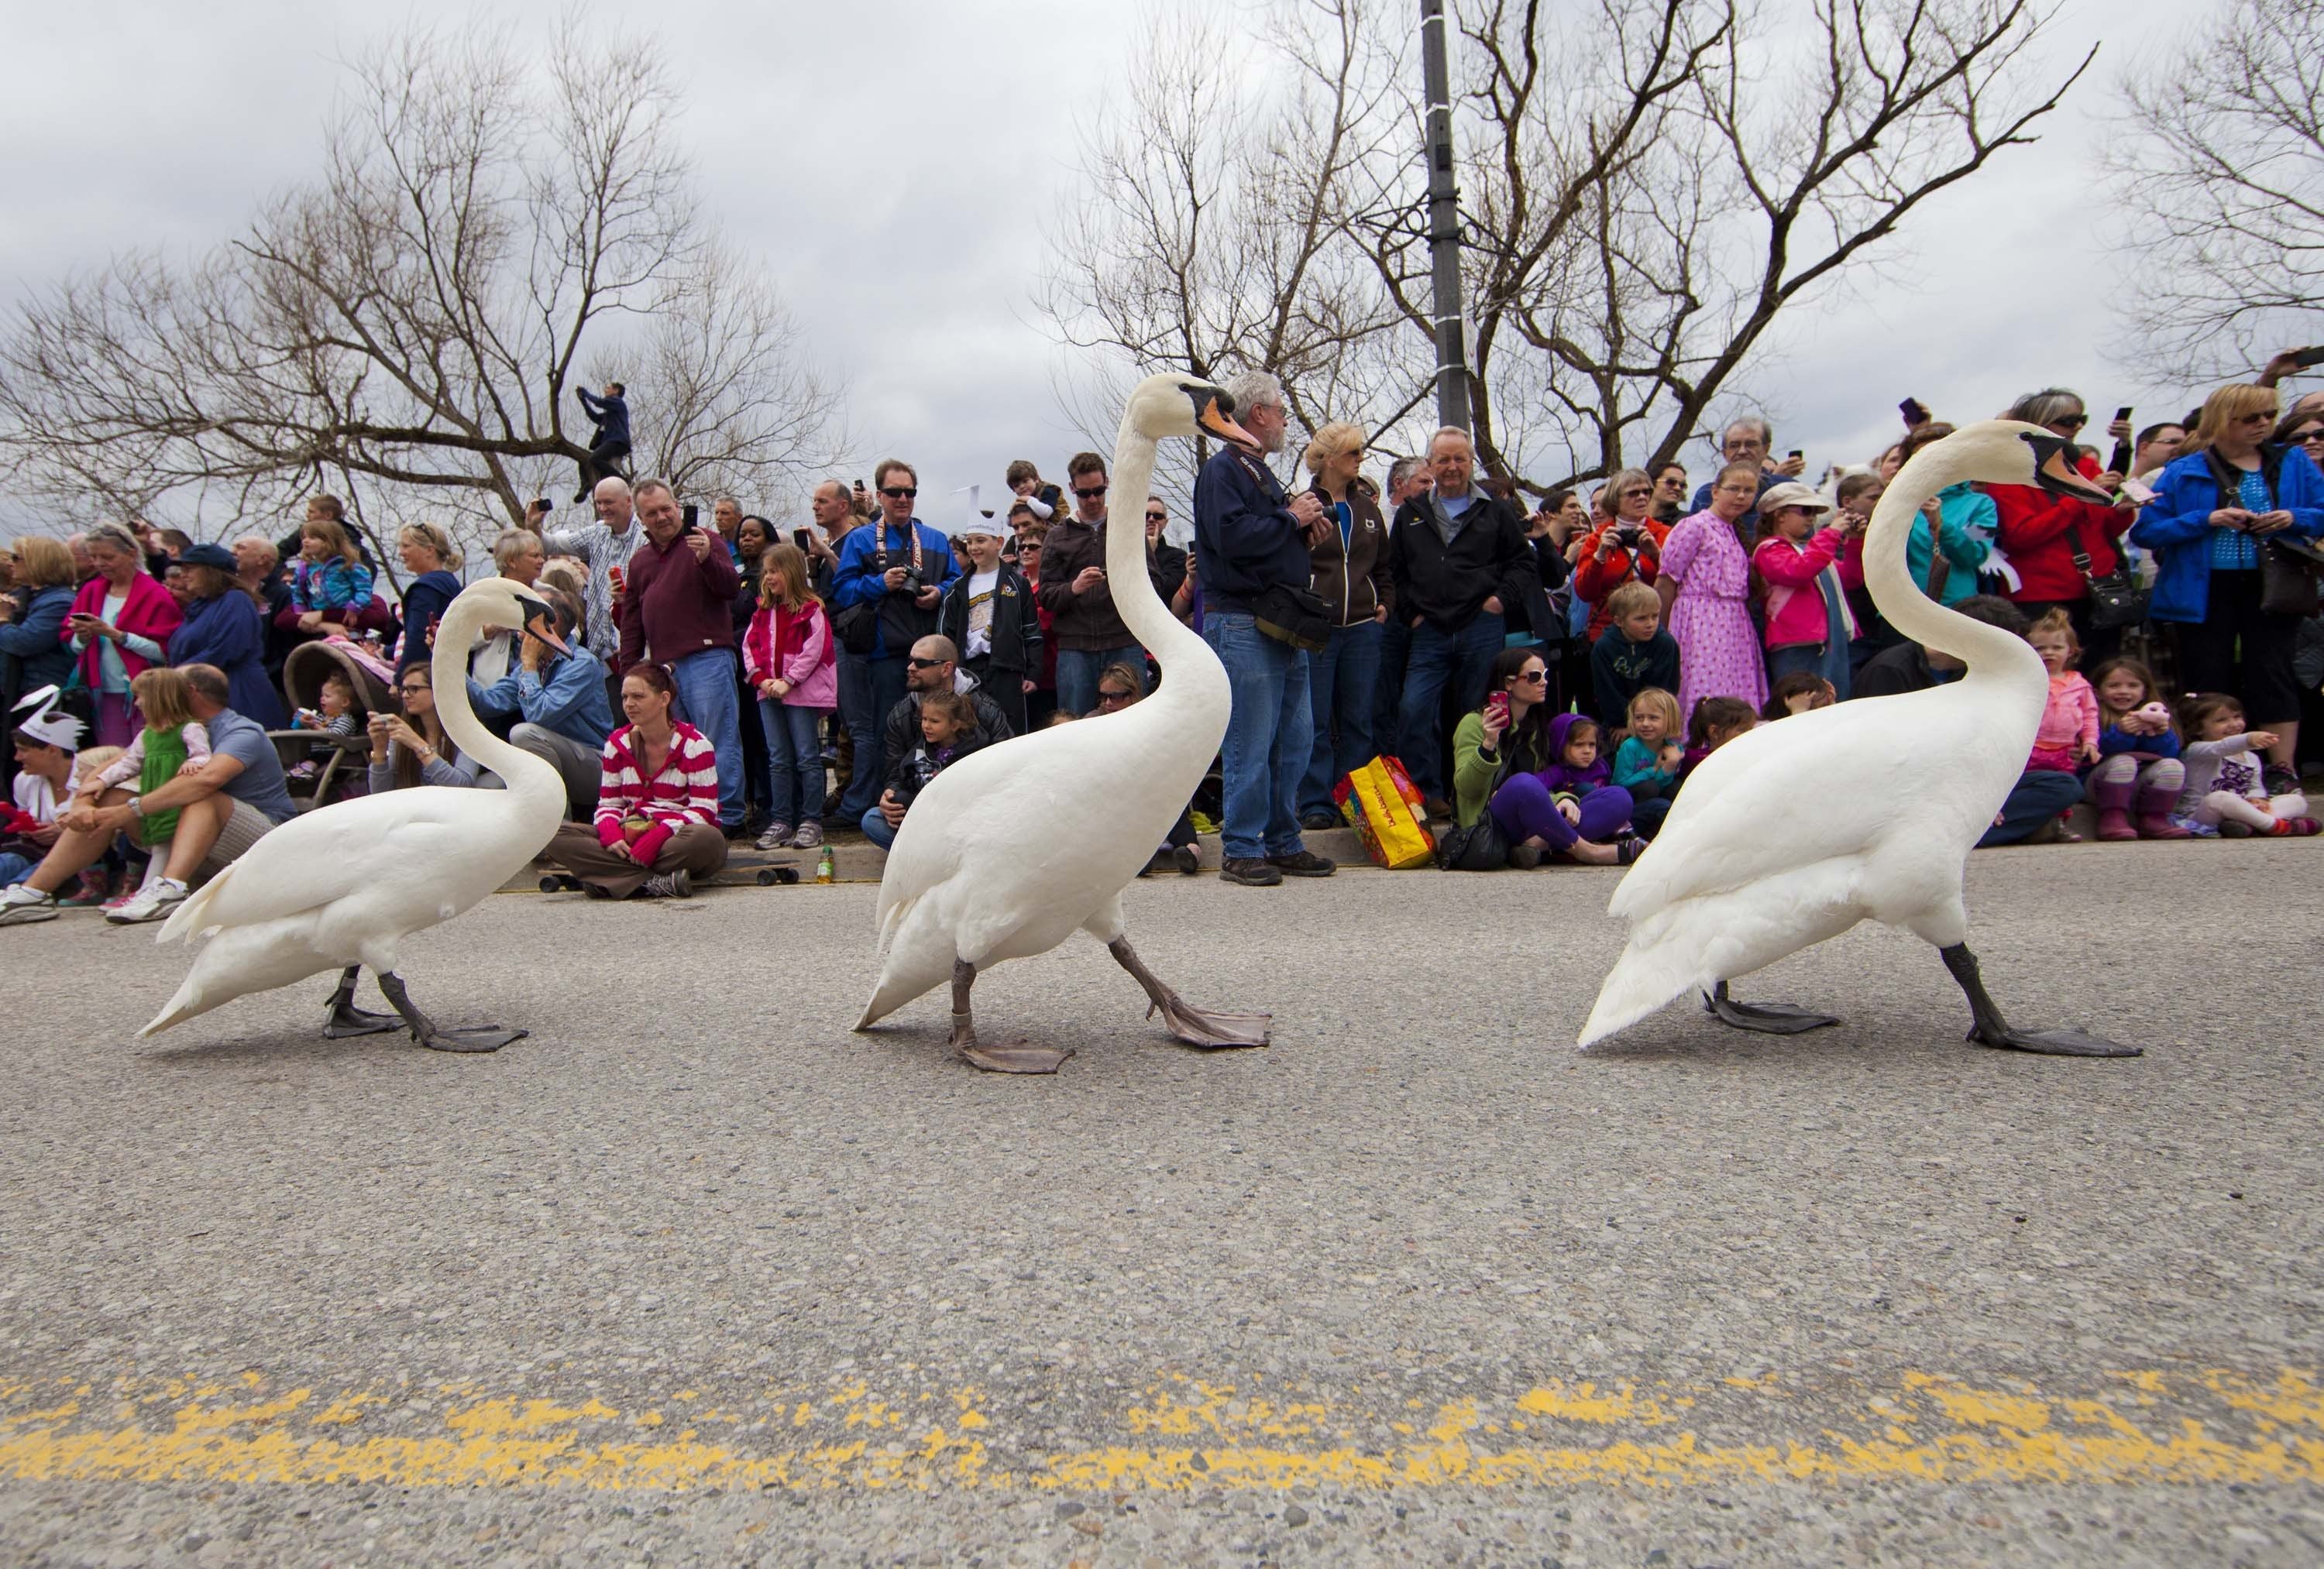 Apr. 13, 2014. A bevy of swans take part in a parade in Stratford, Ontario, Canada. As a traditional event, the parade celebrates the coming of spring every year.